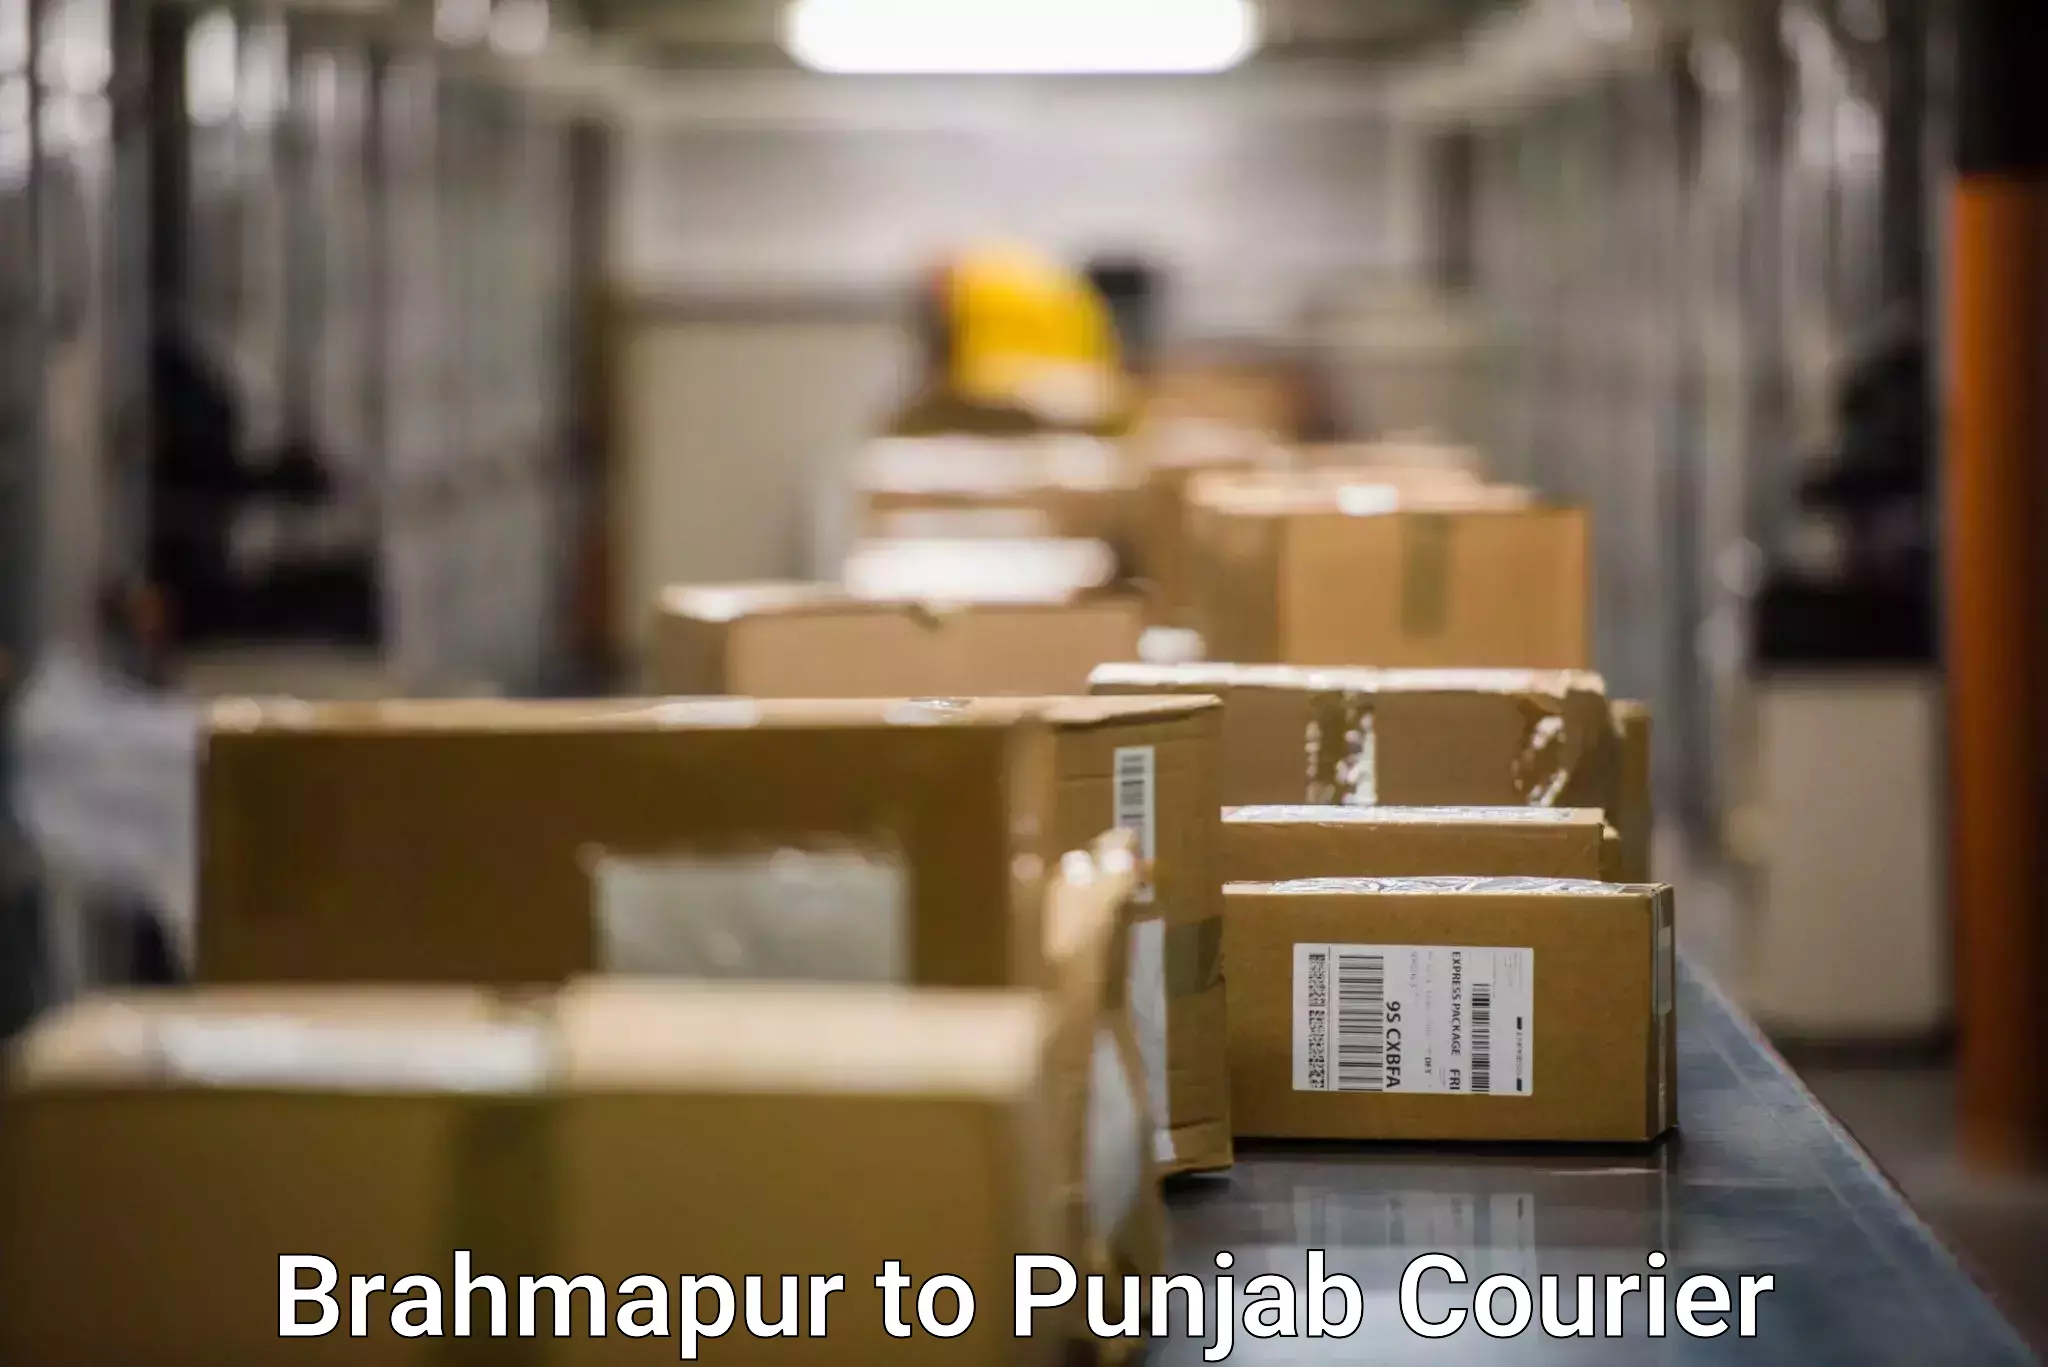 State-of-the-art courier technology Brahmapur to Nabha